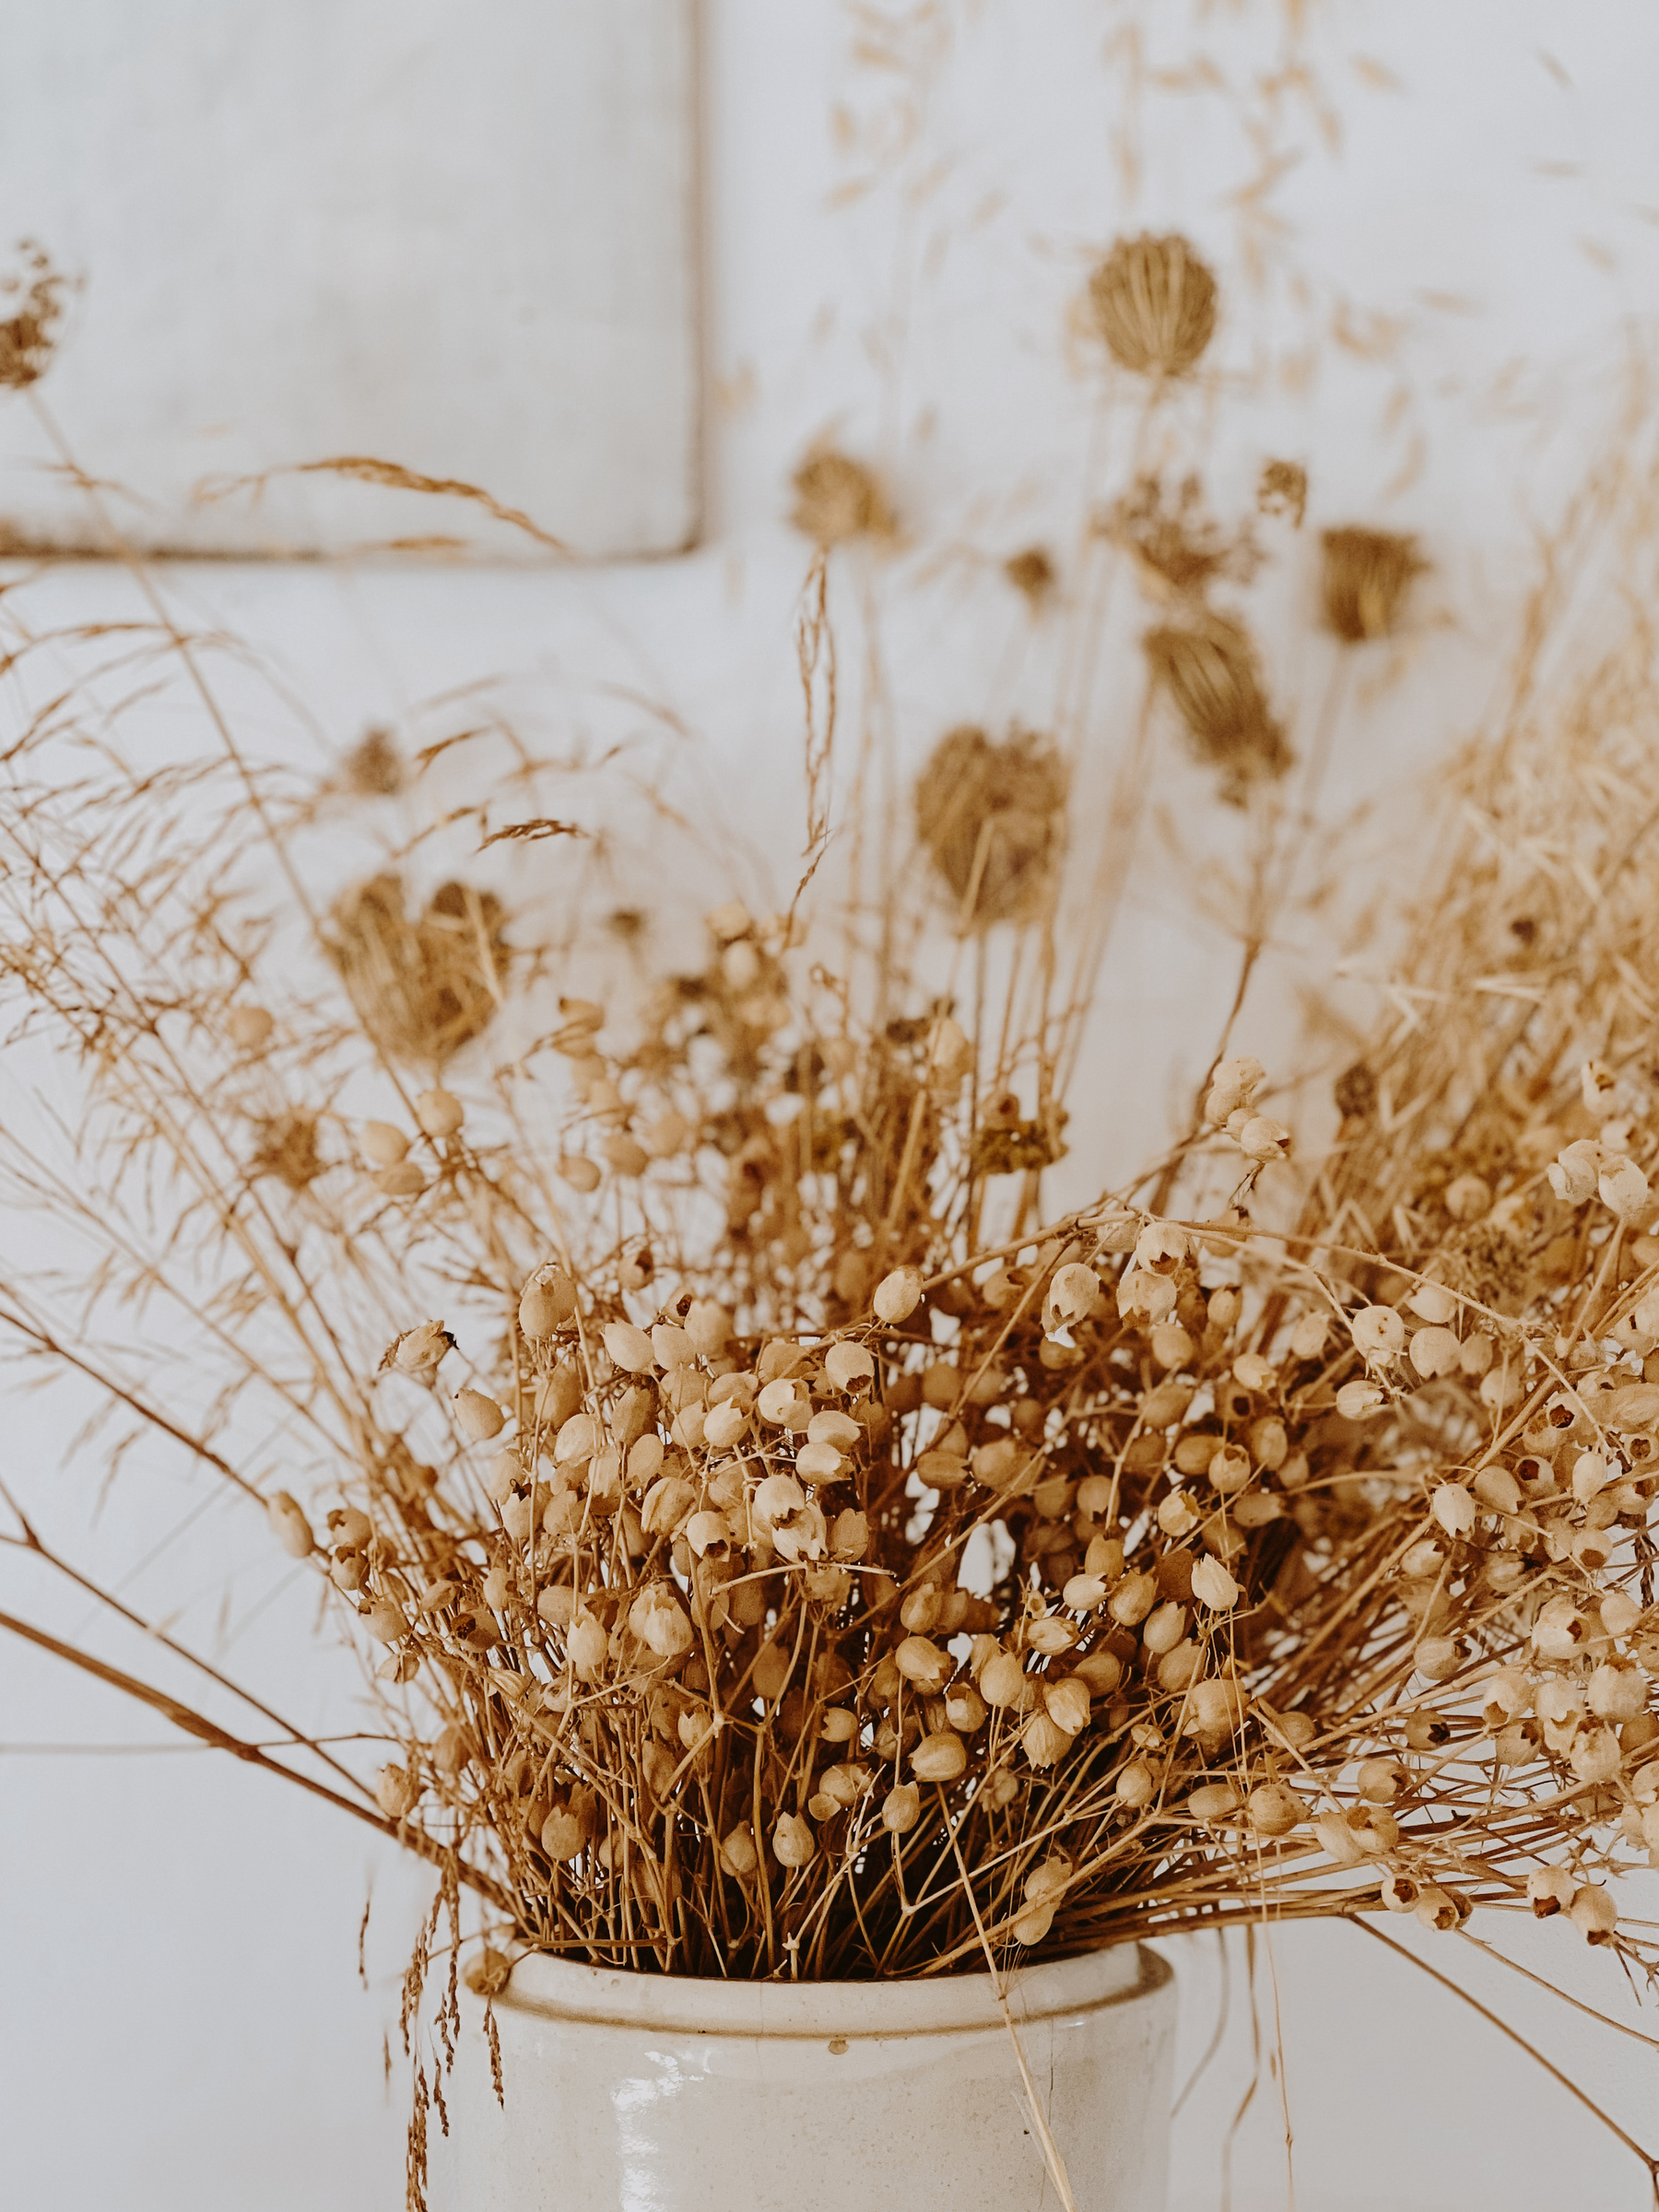 A ceramic vase filled with dried flowers and plants, creating a rustic and natural decorative element. The warm, sepia-toned colors give the image a serene, vintage feel.